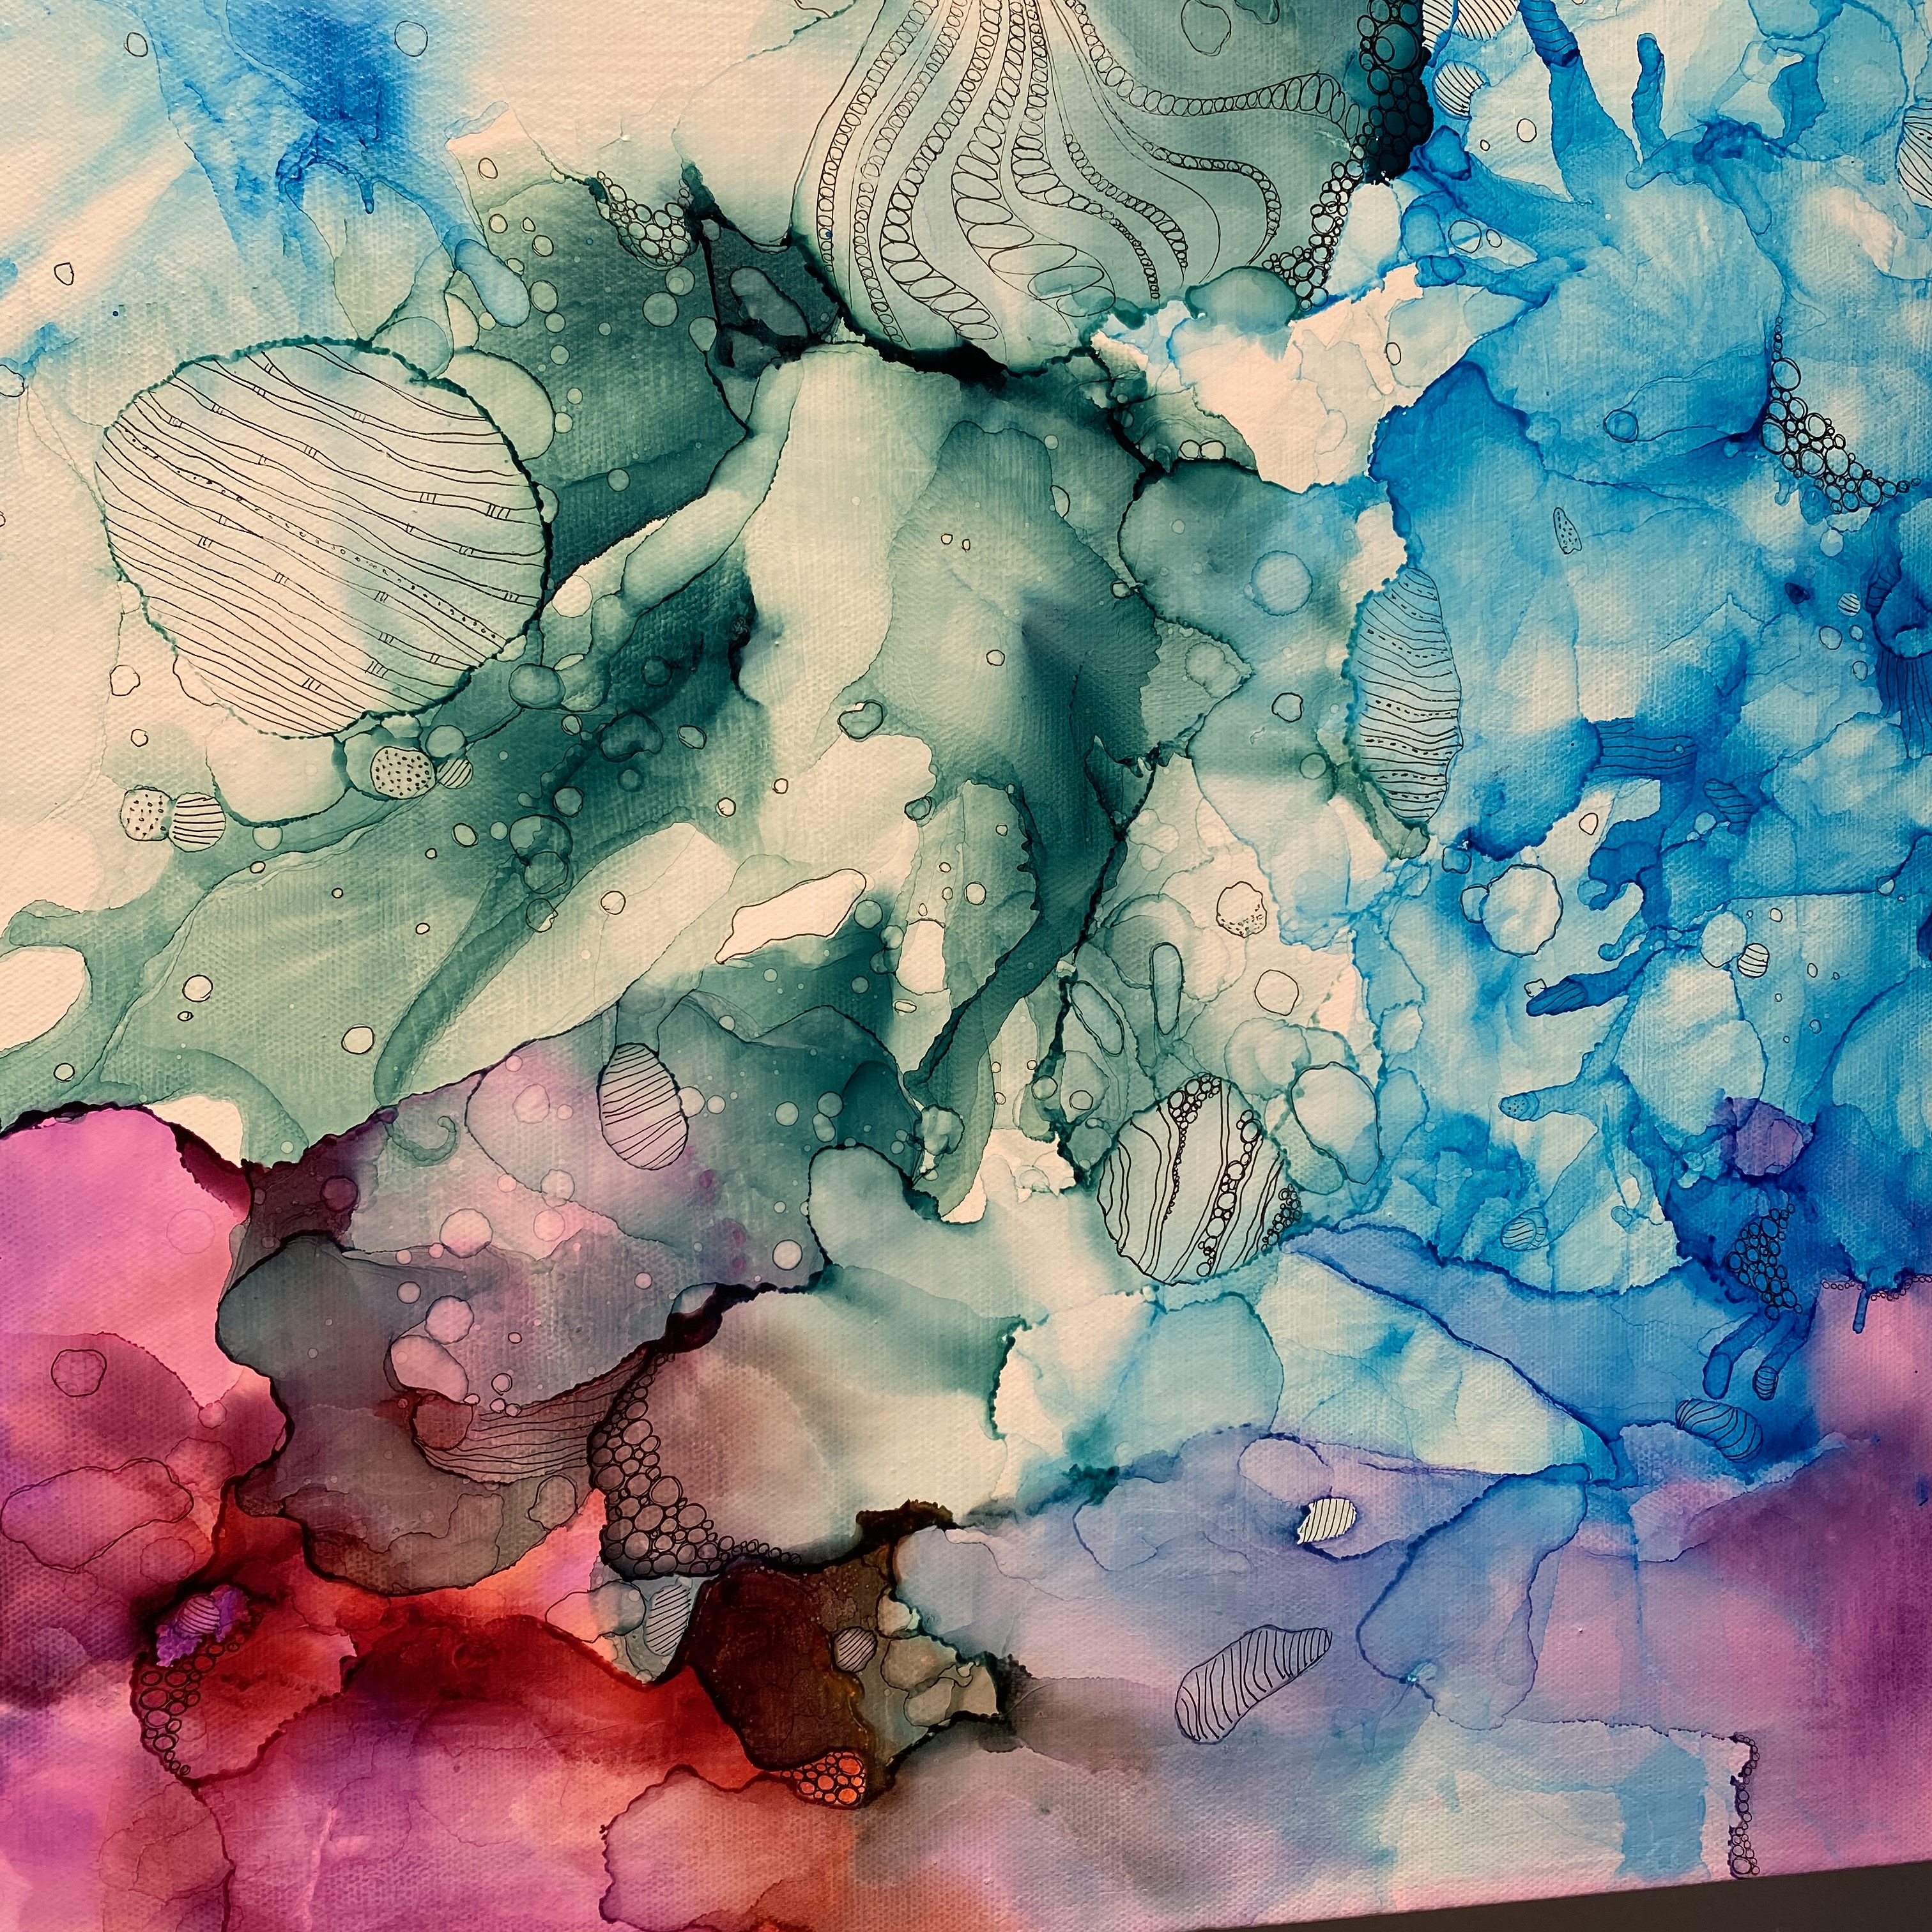 NEW! Yupo paper for alcohol ink - natural paper - diamond painting by Ursus